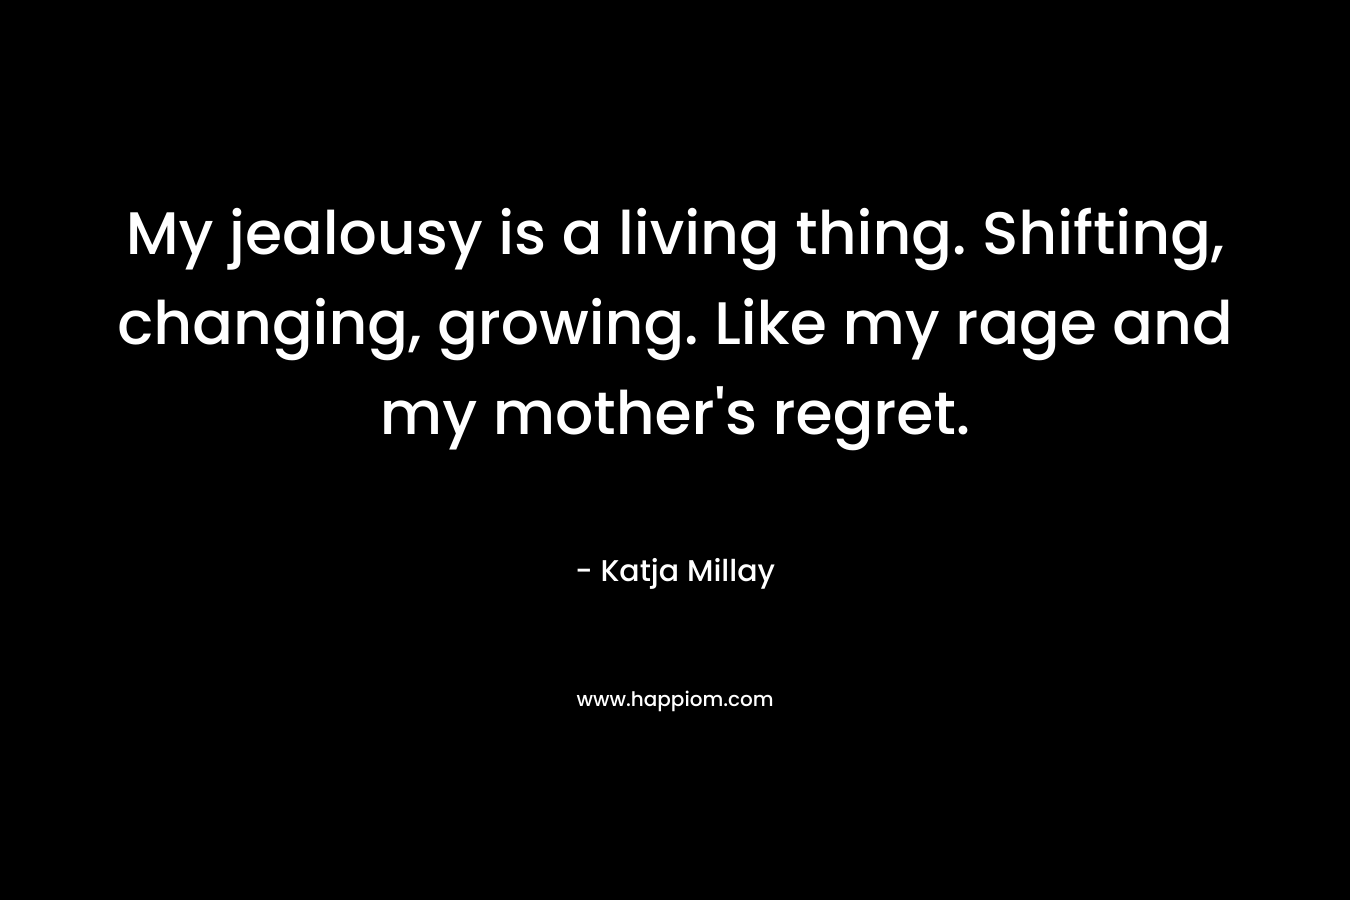 My jealousy is a living thing. Shifting, changing, growing. Like my rage and my mother’s regret. – Katja Millay